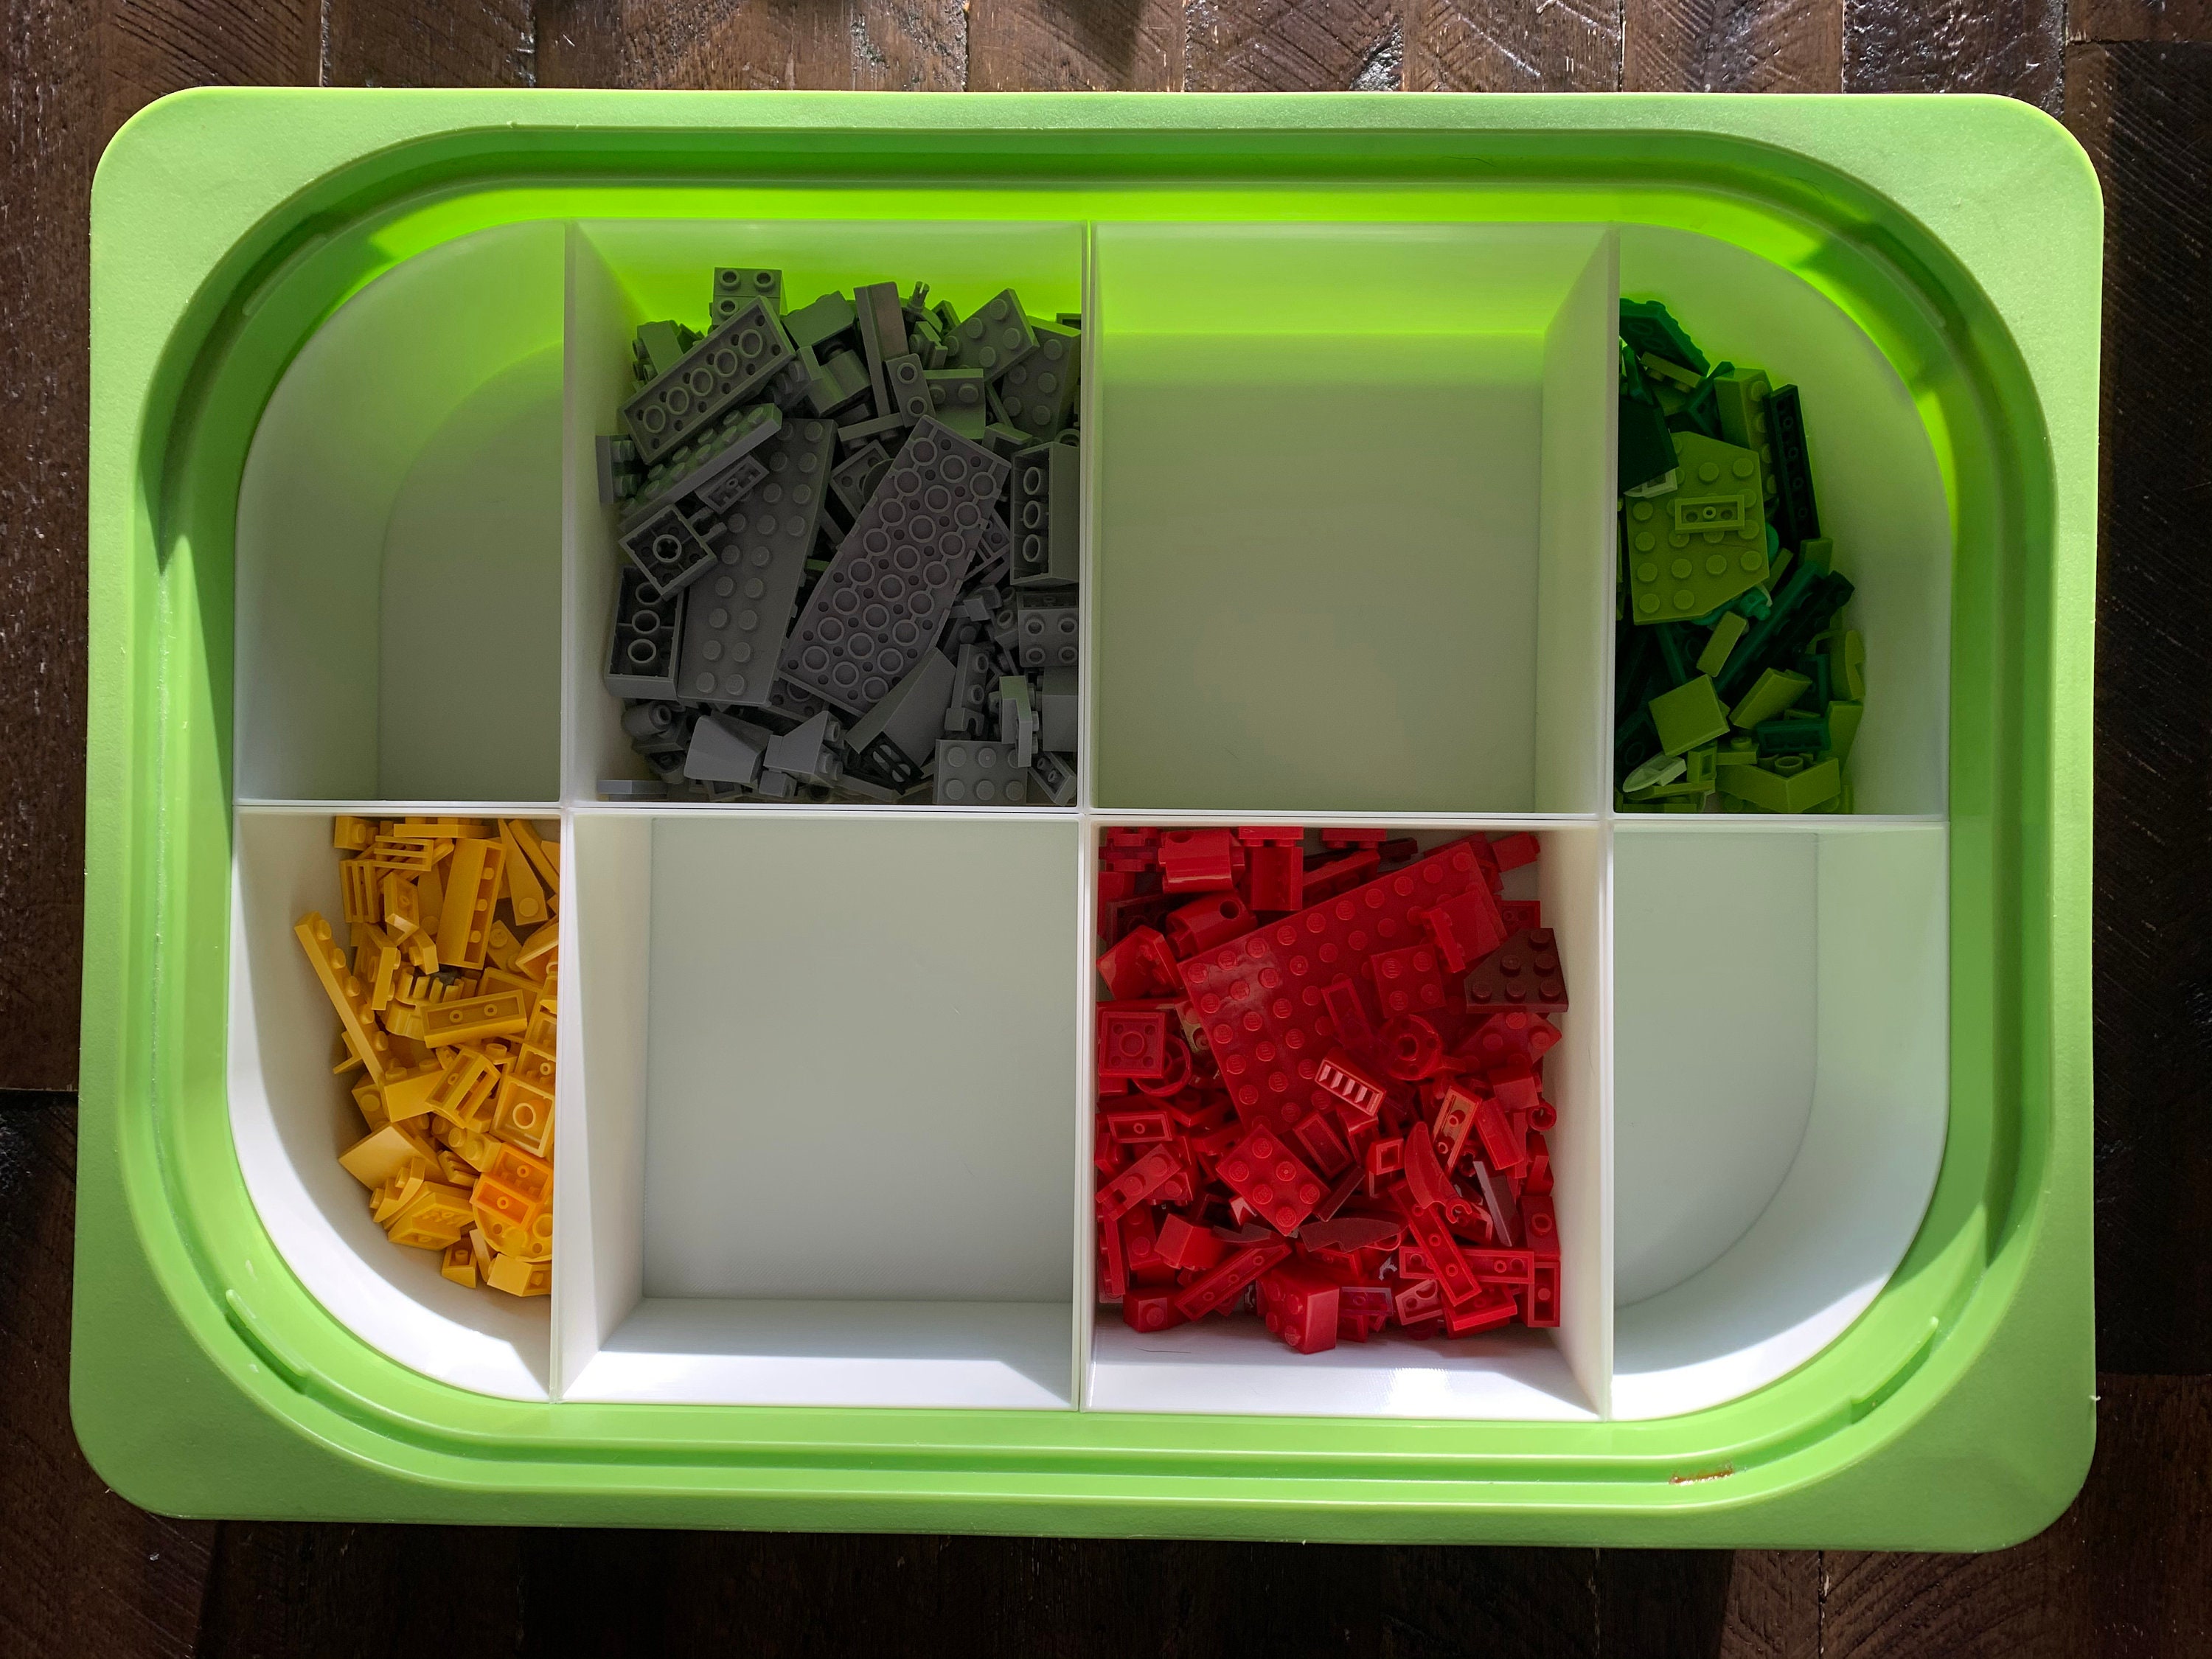 IKEA Teams Up with LEGO for New Storage Container